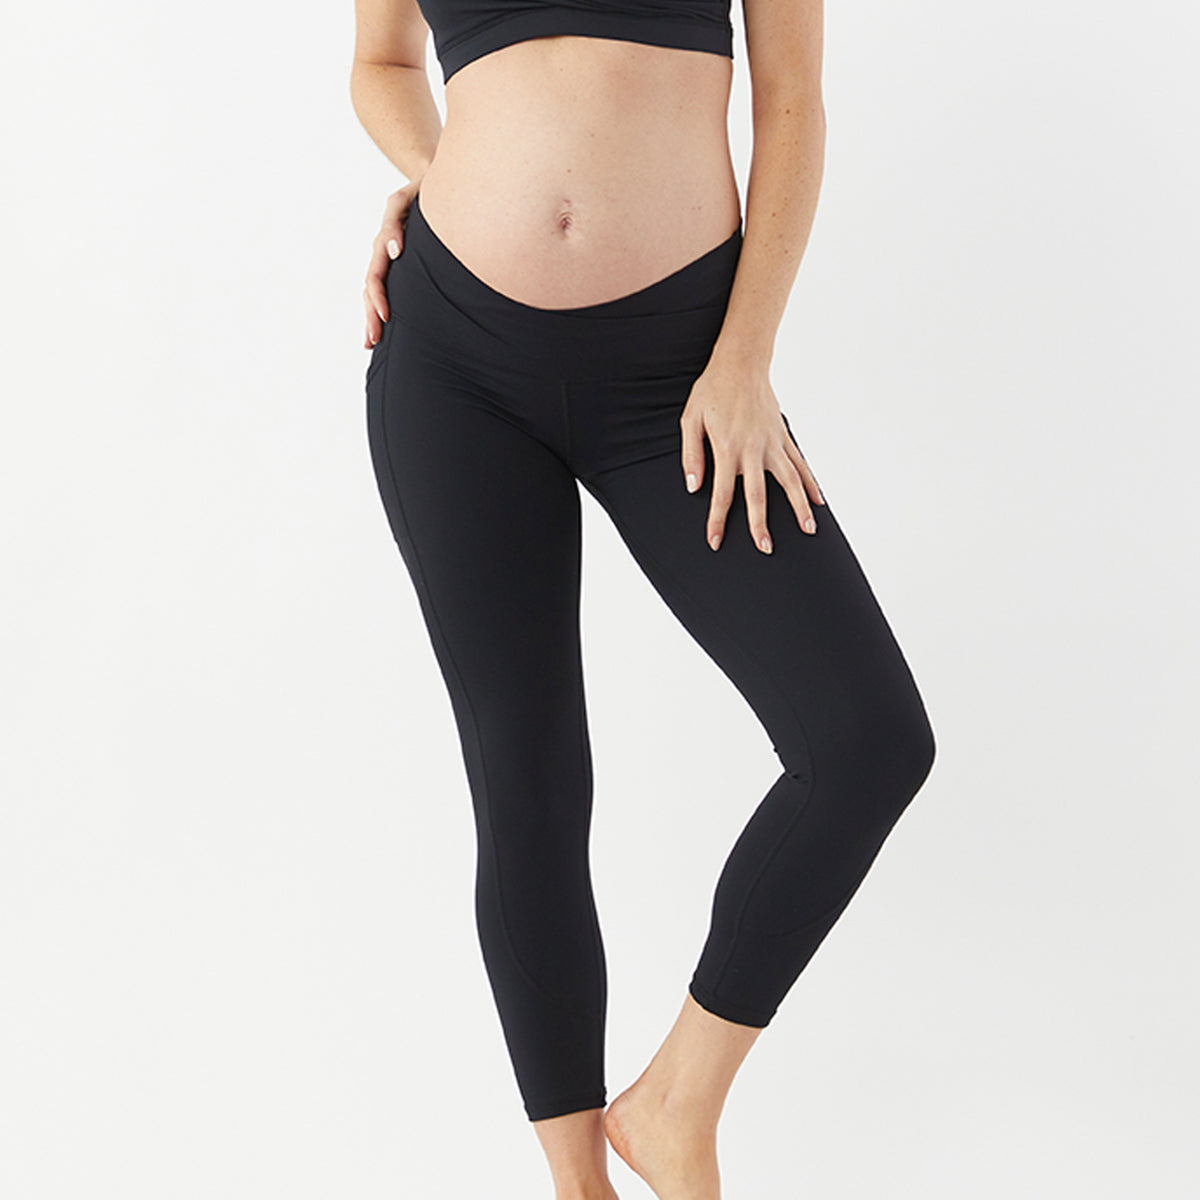 IUGA Supcream Buttery-soft Maternity Legging With Pockets-Navy